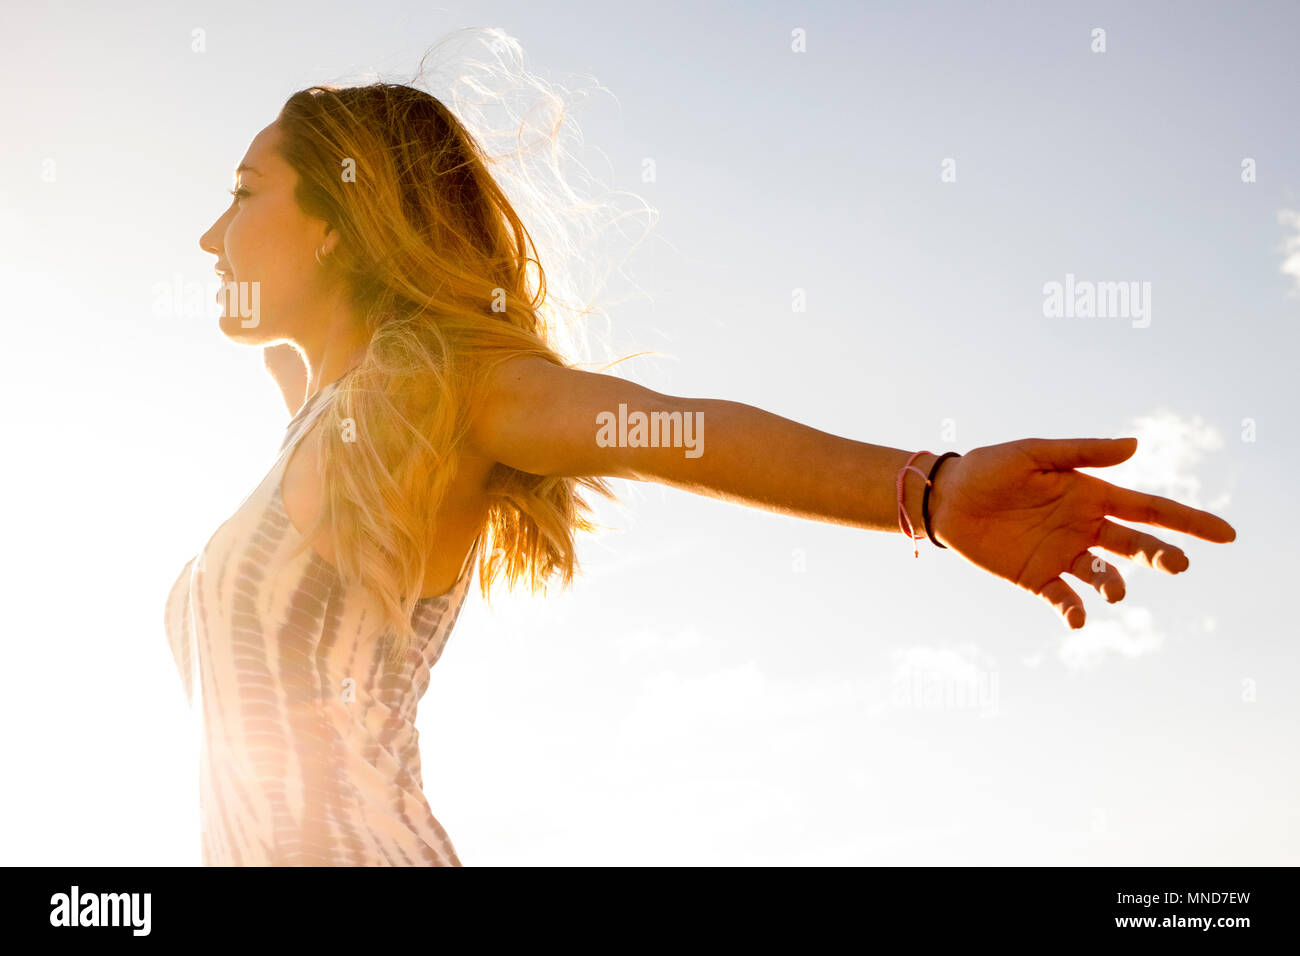 Young nice woman enjoy her freedom opening arms. Independent life and great feel with the world. Embrace all with satisfaction. Tenerife soul. Stock Photo